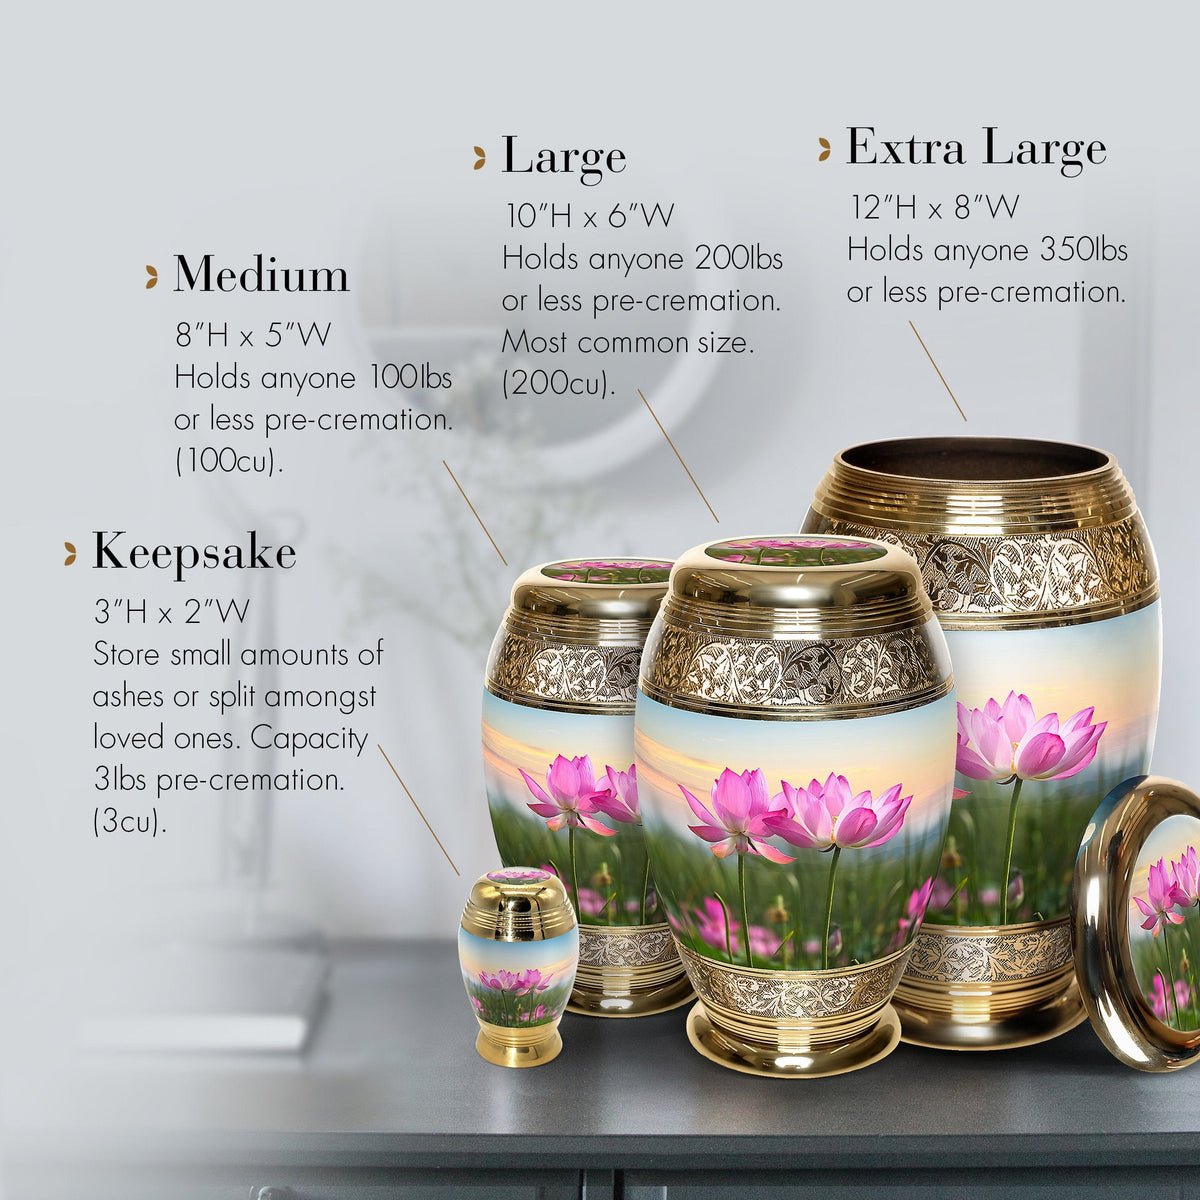 Commemorative Cremation Urns Lotus Tranquility Cremation Urn